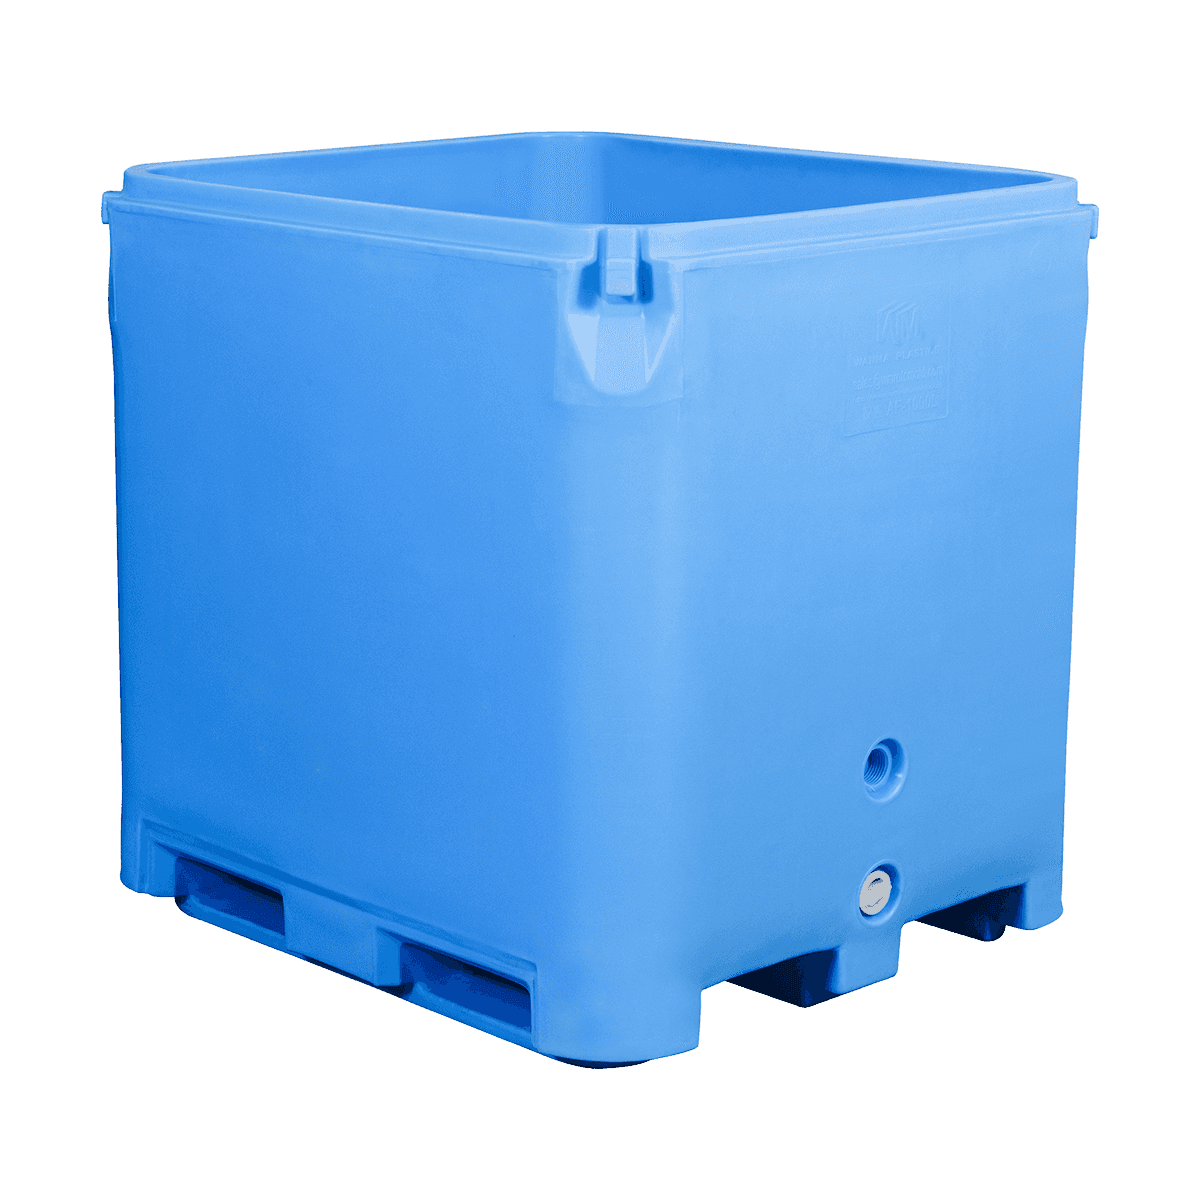 AF-1000L Long Distance Live Fish & Seafood Transportation Containers